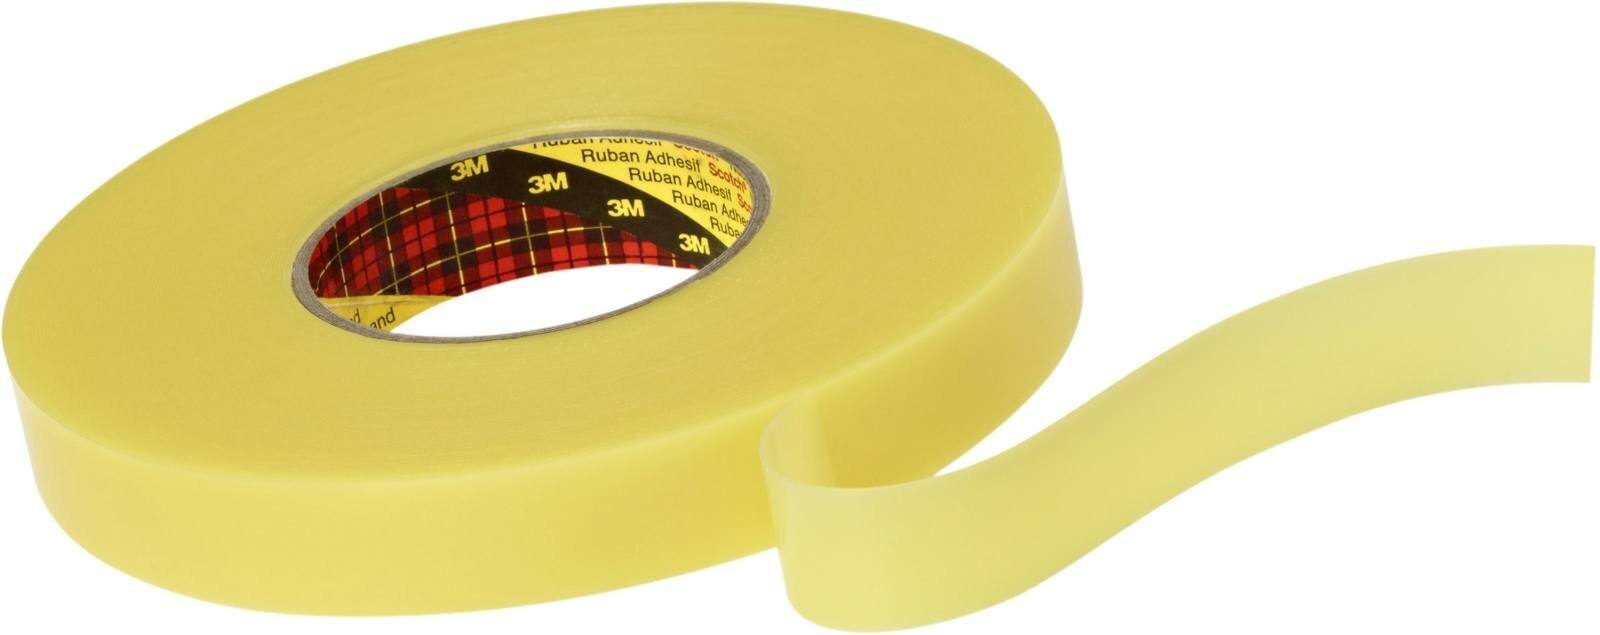 3M Double-sided removable adhesive tape 4656F, yellow, 150 mm x 33 m, 0.6 mm